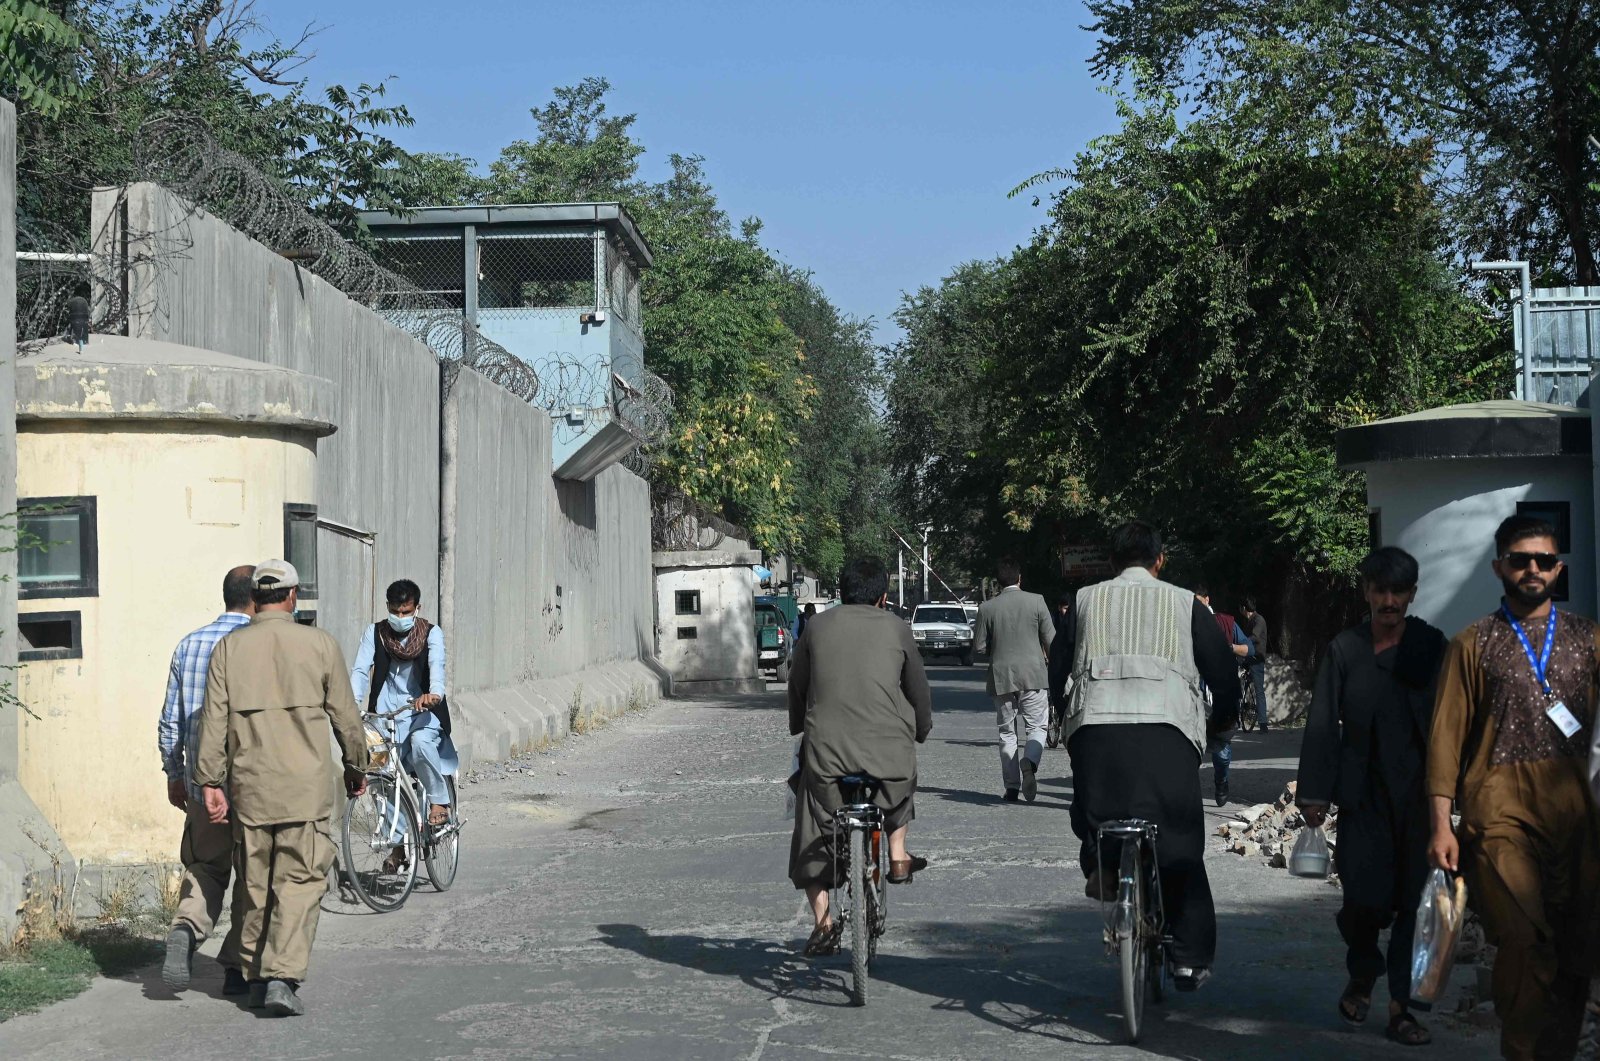 Afghan men walk through a sreet in the Green Zone of Kabul, Afghanistan, Aug. 15, 2021. (AFP Photo)